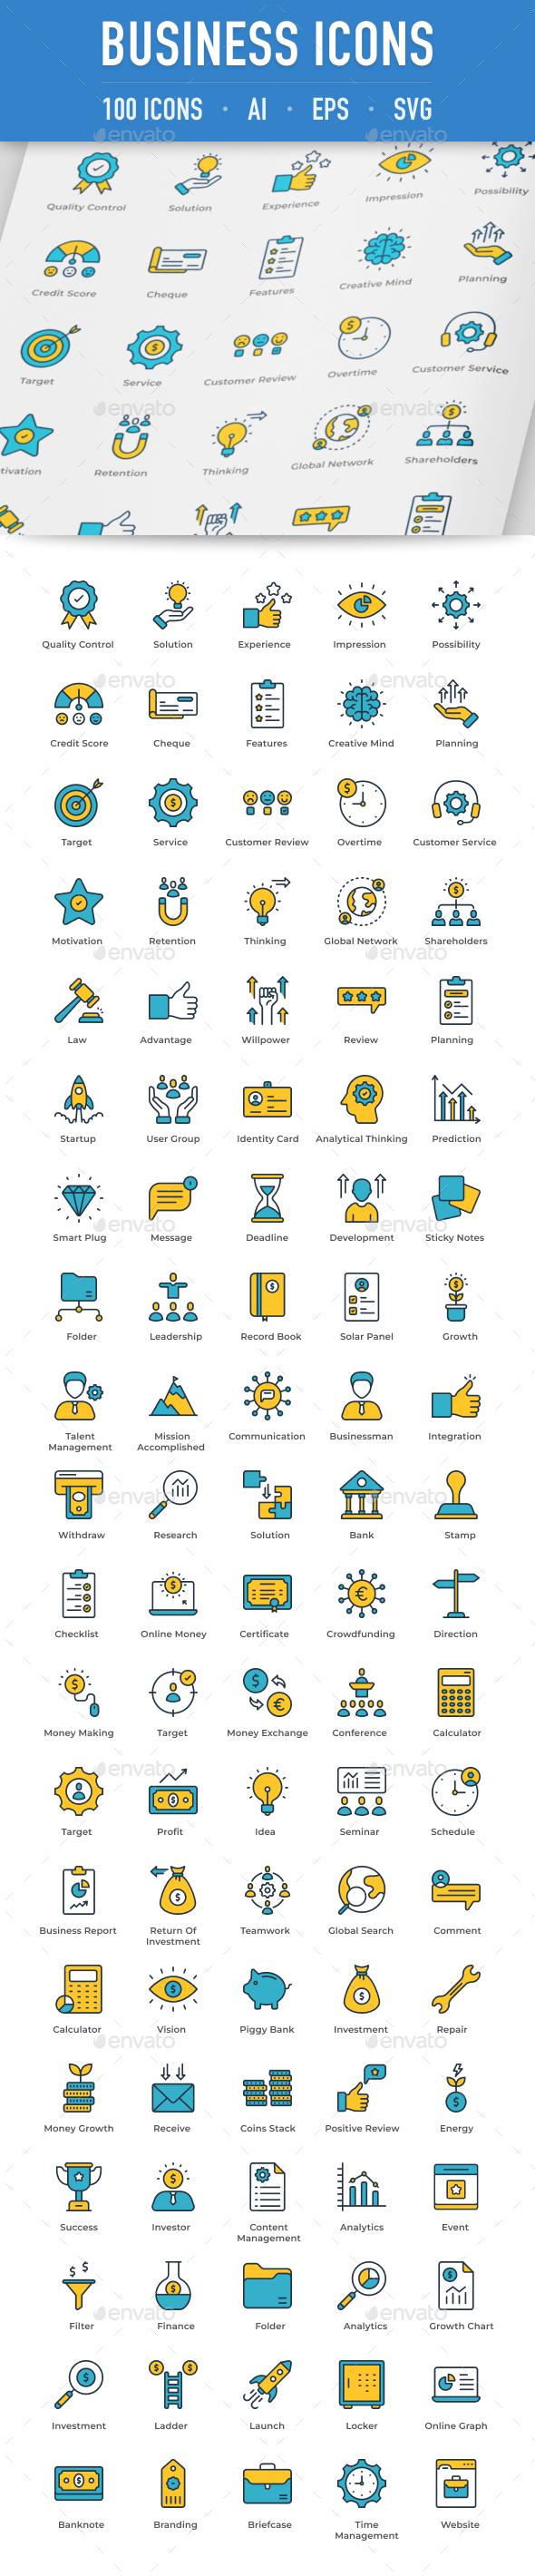 [DOWNLOAD]Business Icons